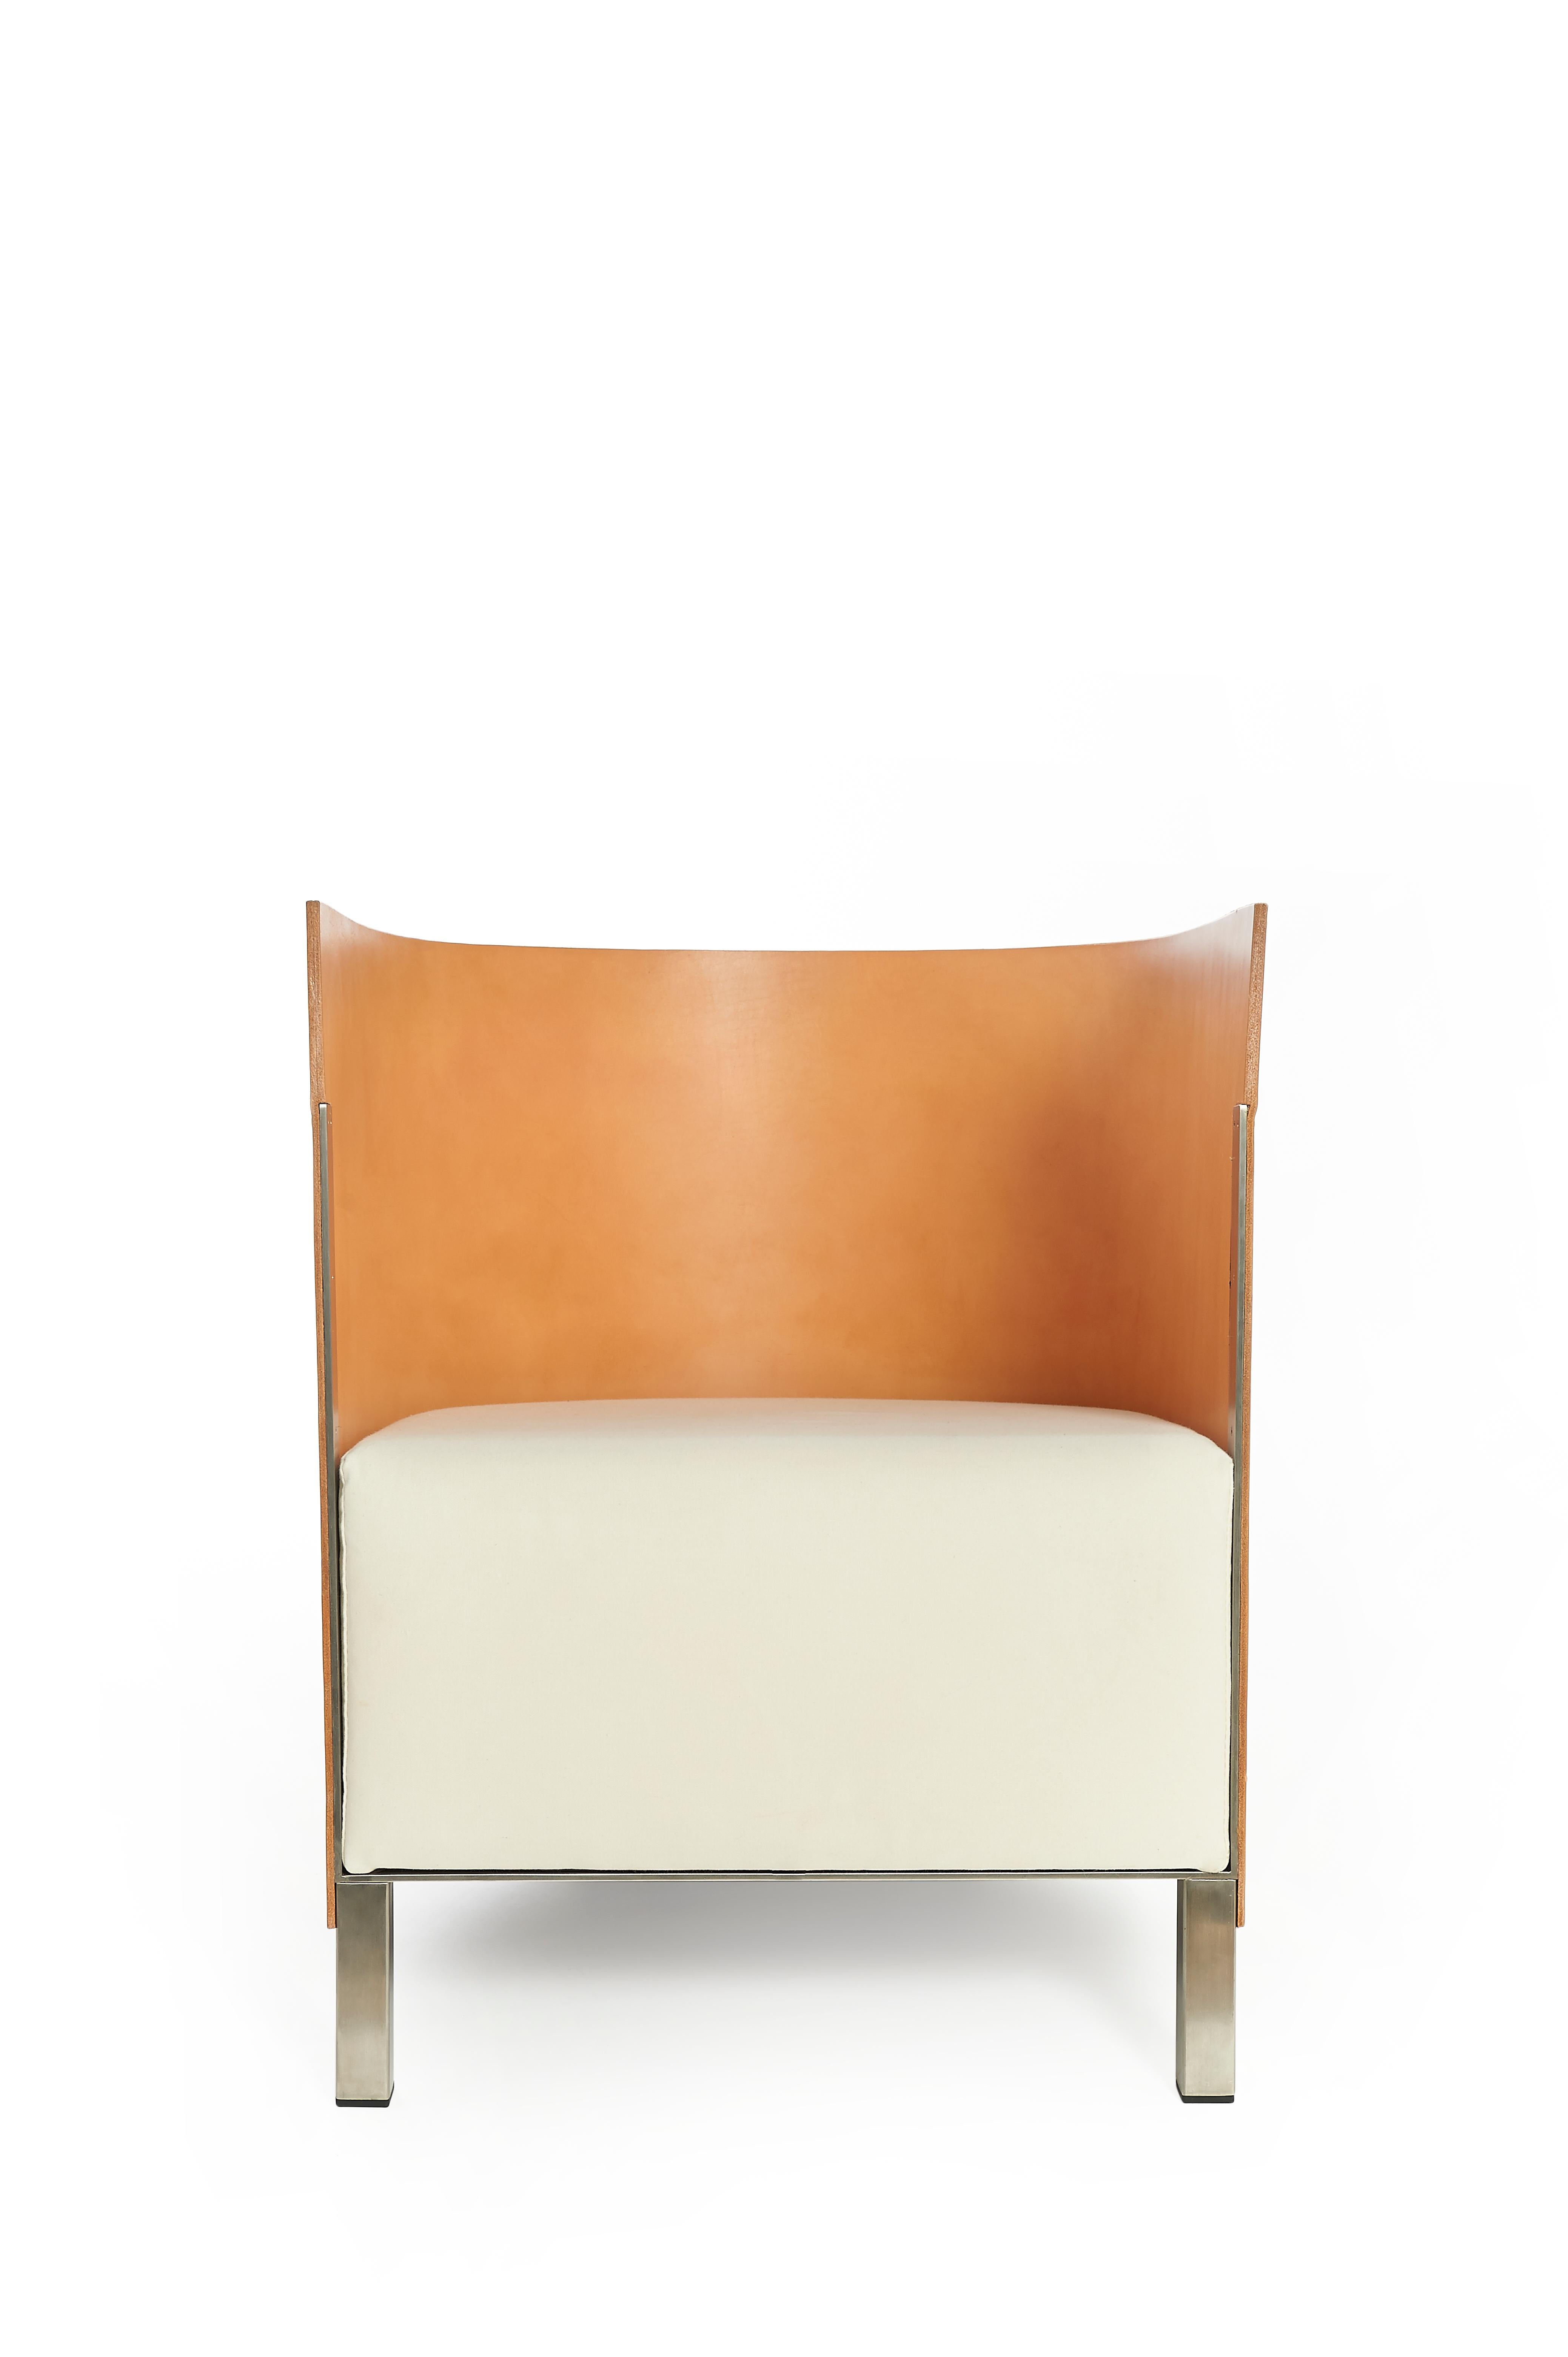 The Lensvelt MVS S88 cognac-colored leather chair was designed by Maarten van Severen. It is a low armchair. Materials: The backrest is made of cognac-colored saddle leather, seat of off-white canvas and the frame is stainless steel.
    